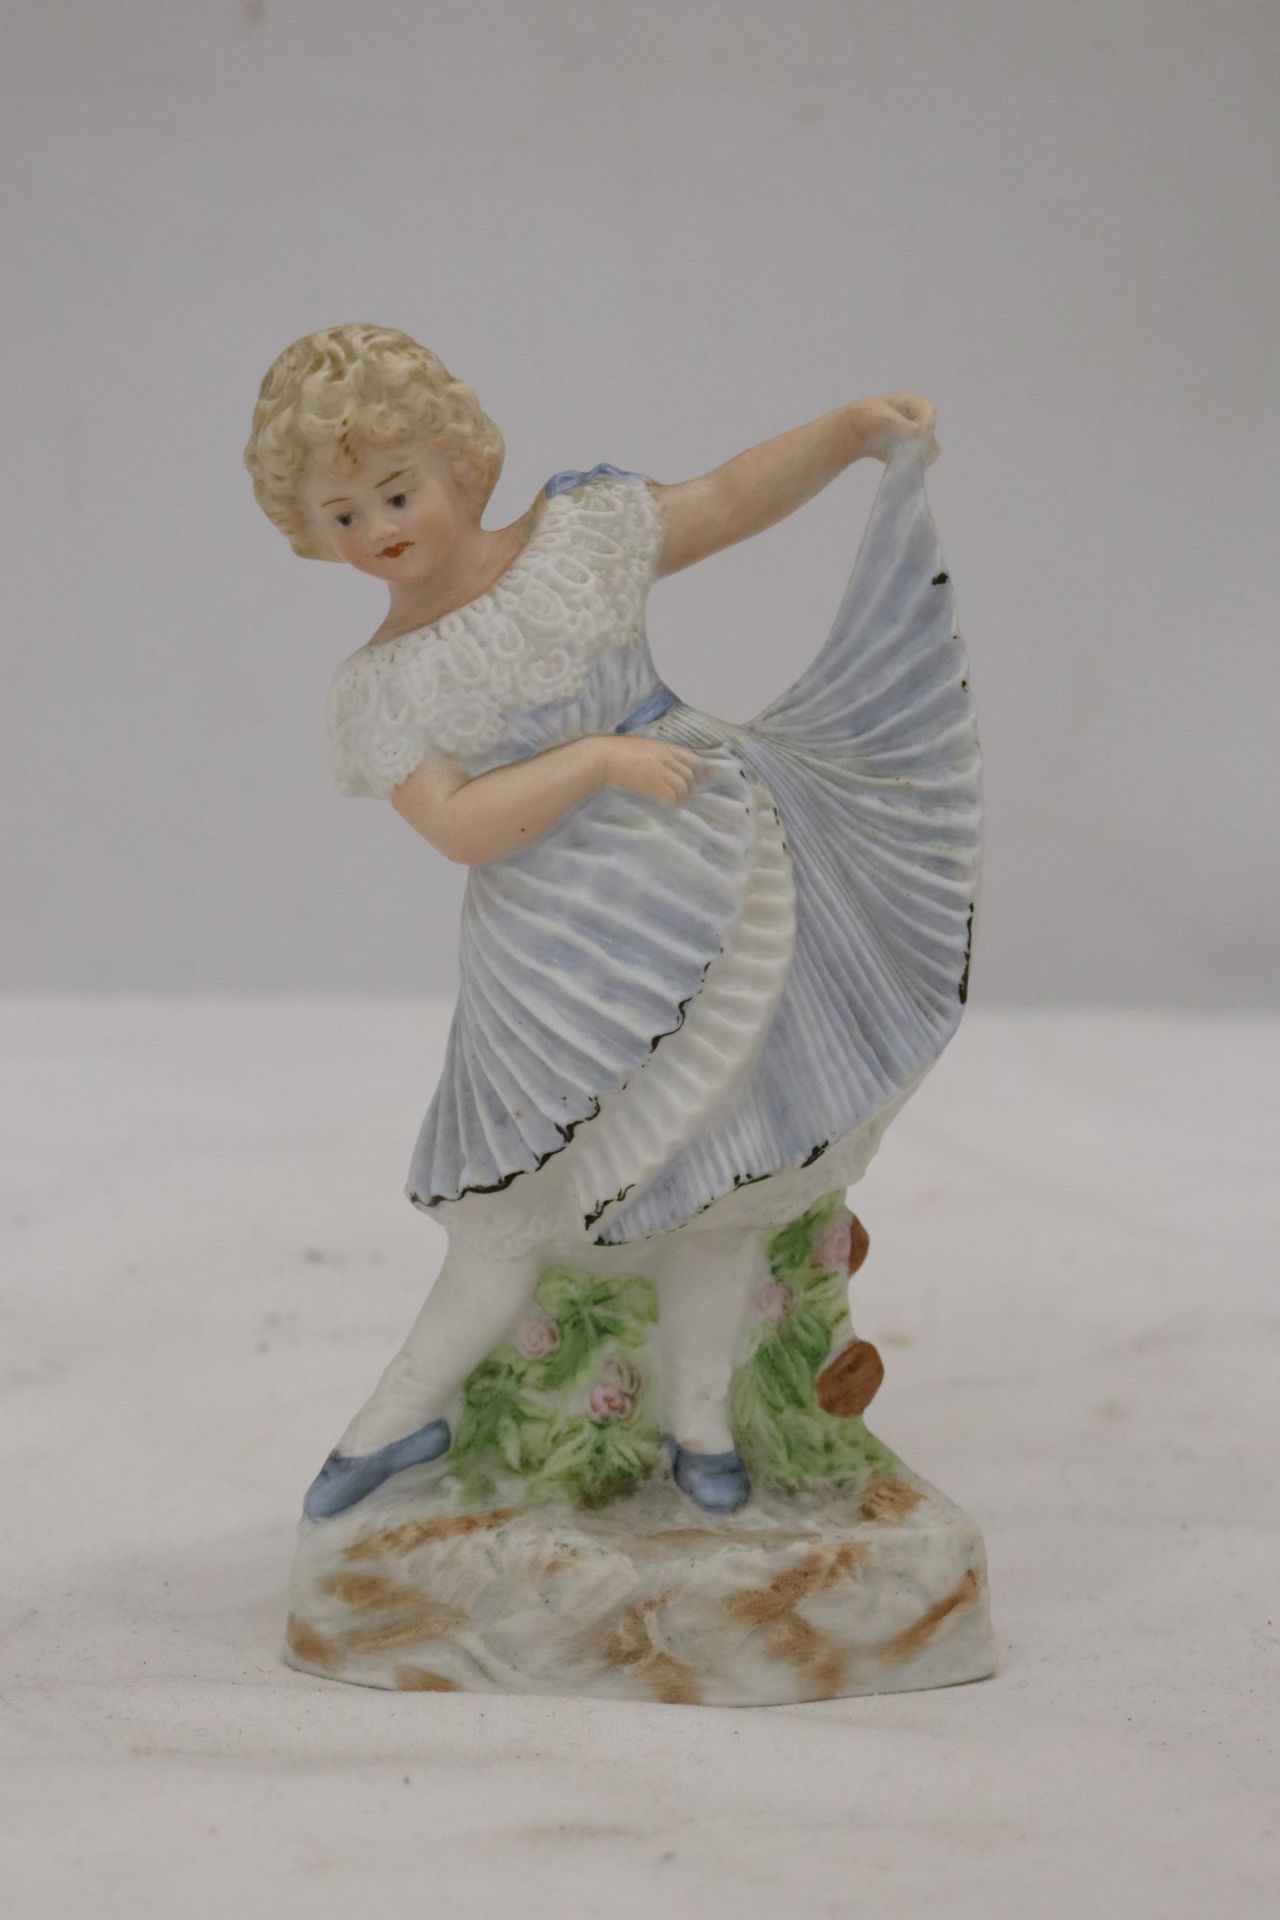 A BISQUE FIGURE OF A YOUNG LADY, MARKED TO THE BASE